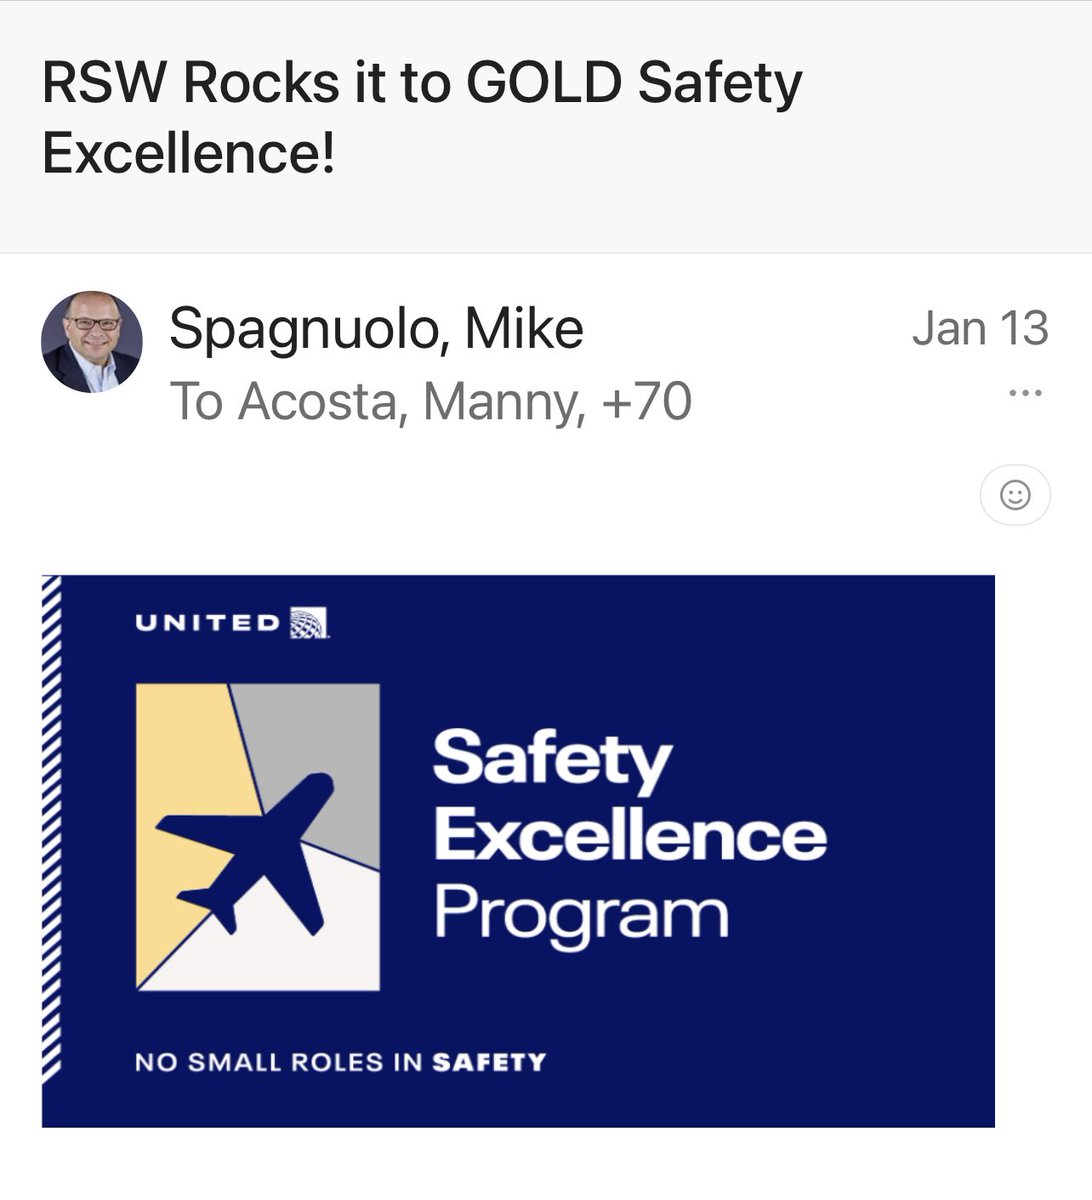 We are so happy to see that Safety is Our priority and Culture! RSW Team working together on another Great accomplishment! GOLD SAFETY EXCELLENCE Good Leads the Way @MikeSpagnuoloUA @LouFarinaccio @weareunited @AOSafetyUAL @united @JMRoitman @scarnes1978